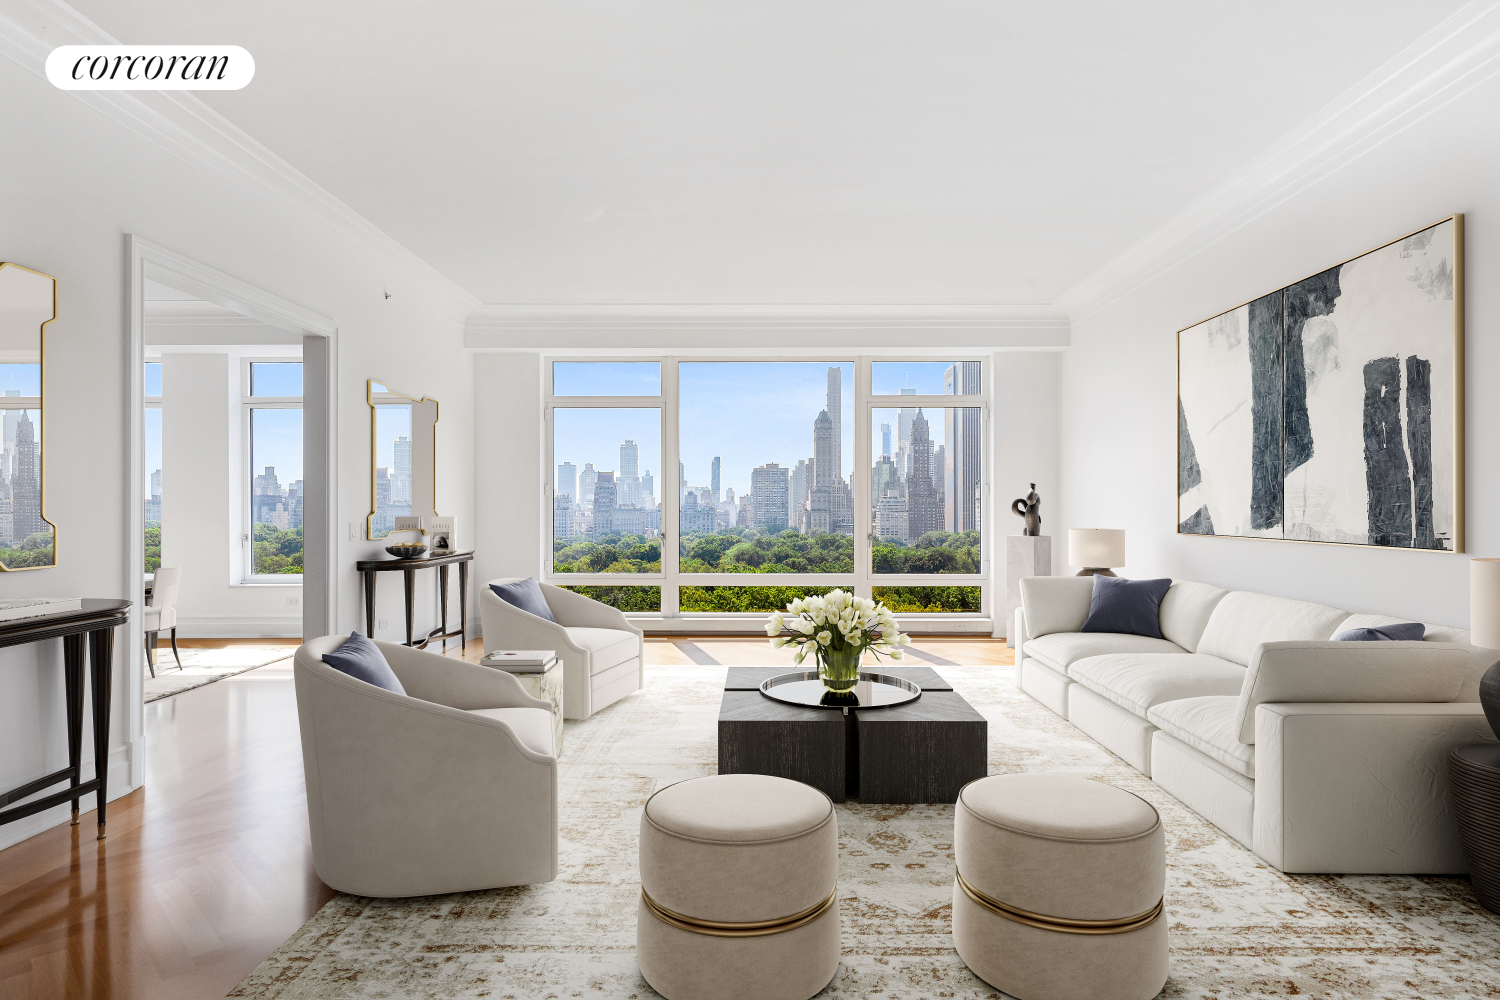 15 Central Park 14B, Lincoln Sq, Upper West Side, NYC - 4 Bedrooms  
3.5 Bathrooms  
8 Rooms - 